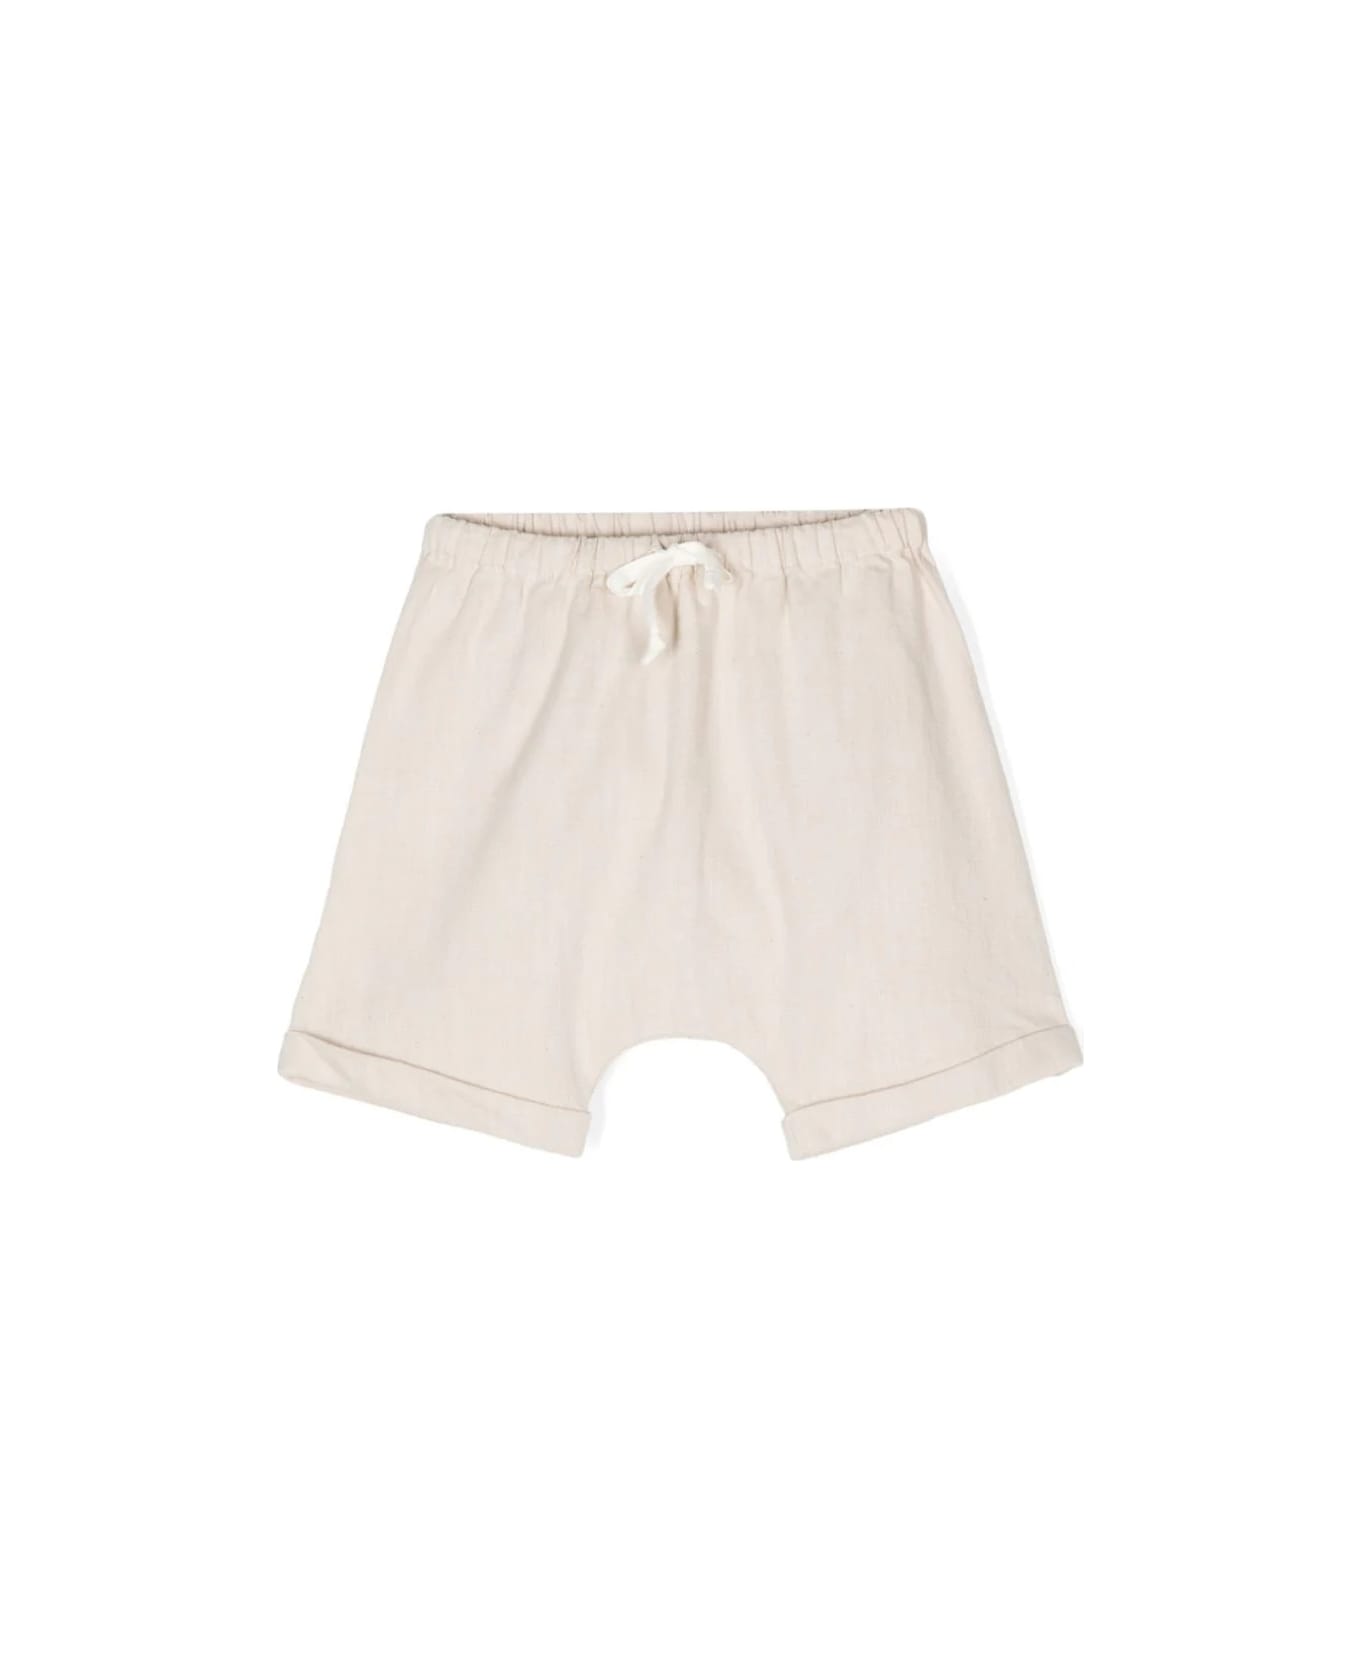 Zhoe & Tobiah Shorts Con Coulisse - Beige ボトムス